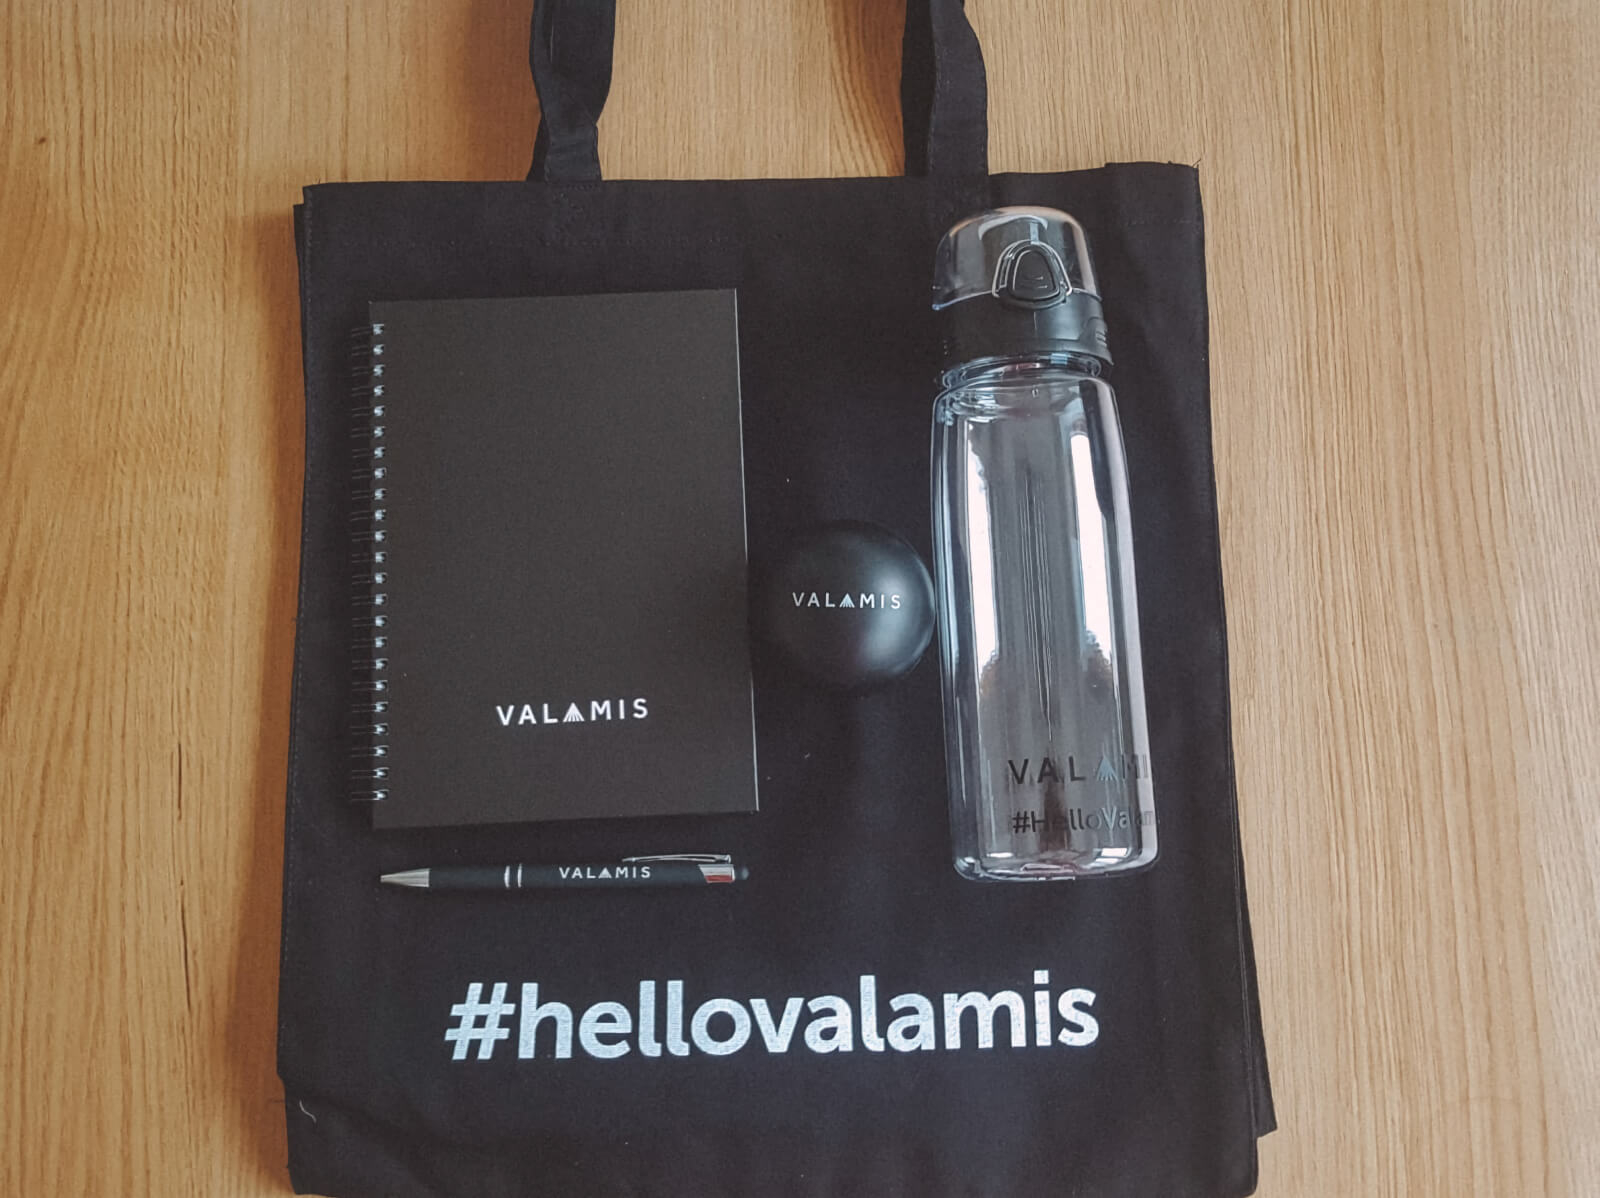 Valamis welcome package: bag, stress ball, bottle, notebook.